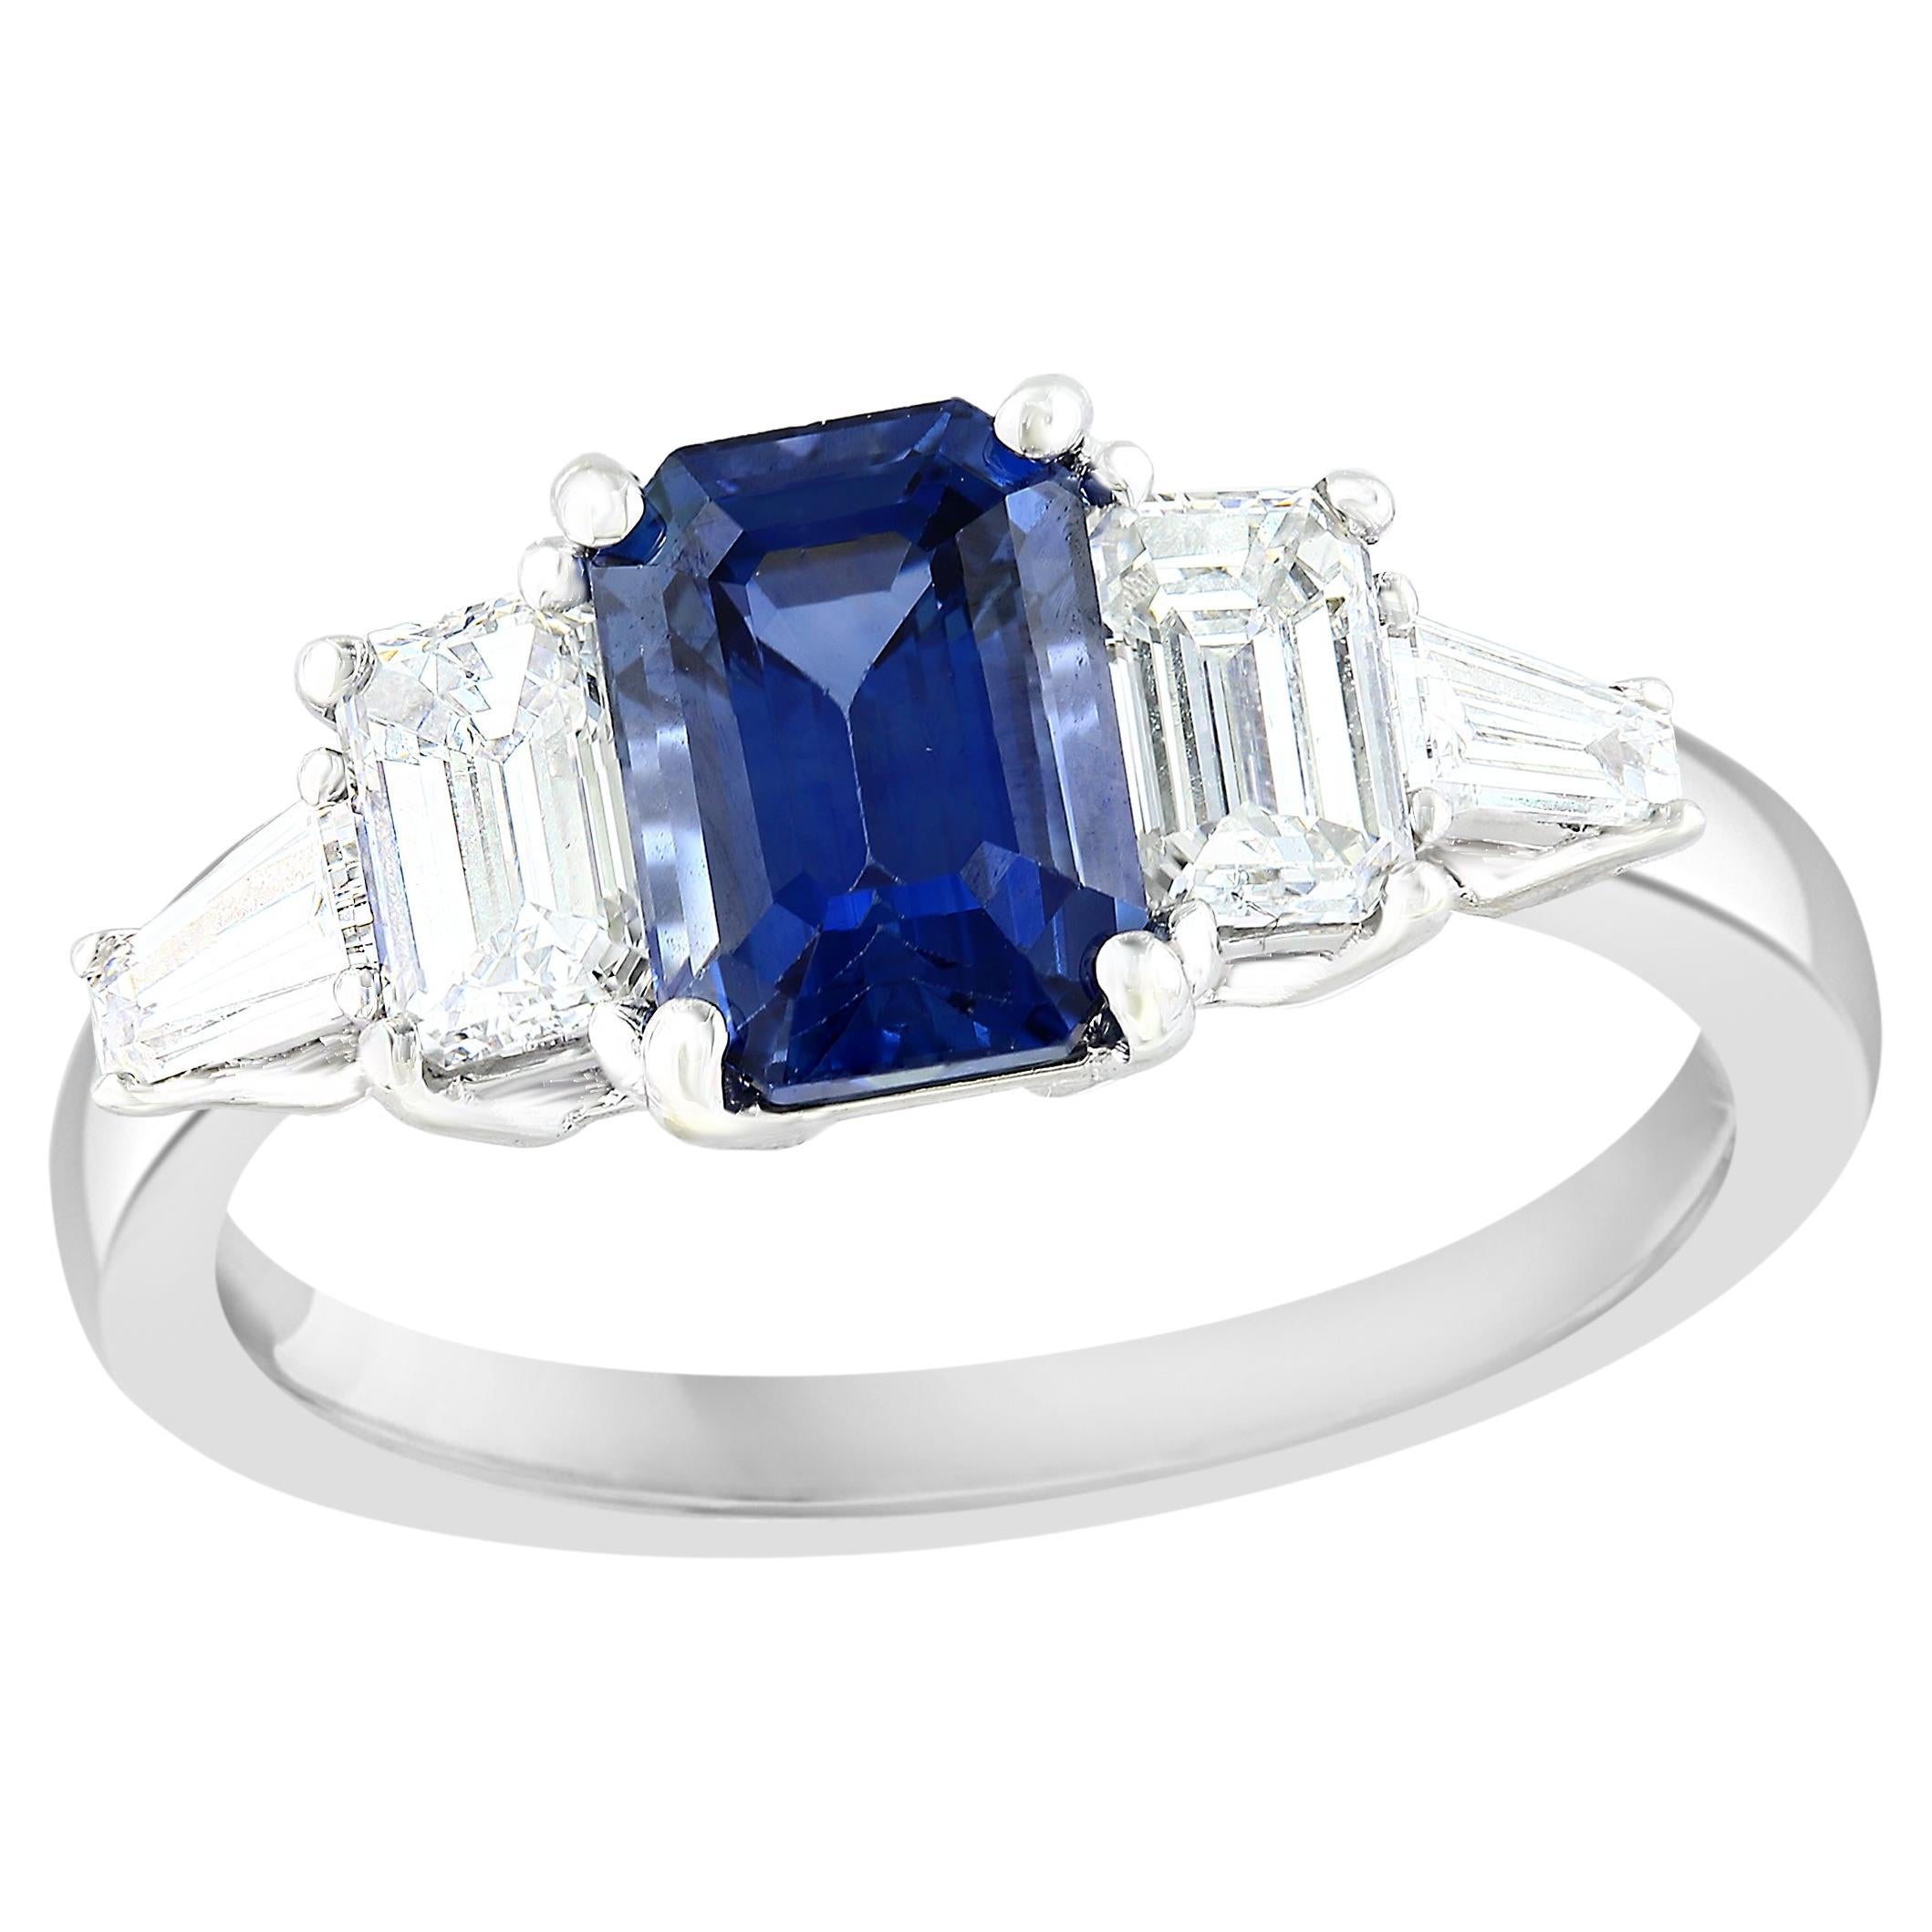 1.12 Carat Emerald Cut Sapphire and Diamond 5 Stone Ring in 14k White Gold For Sale